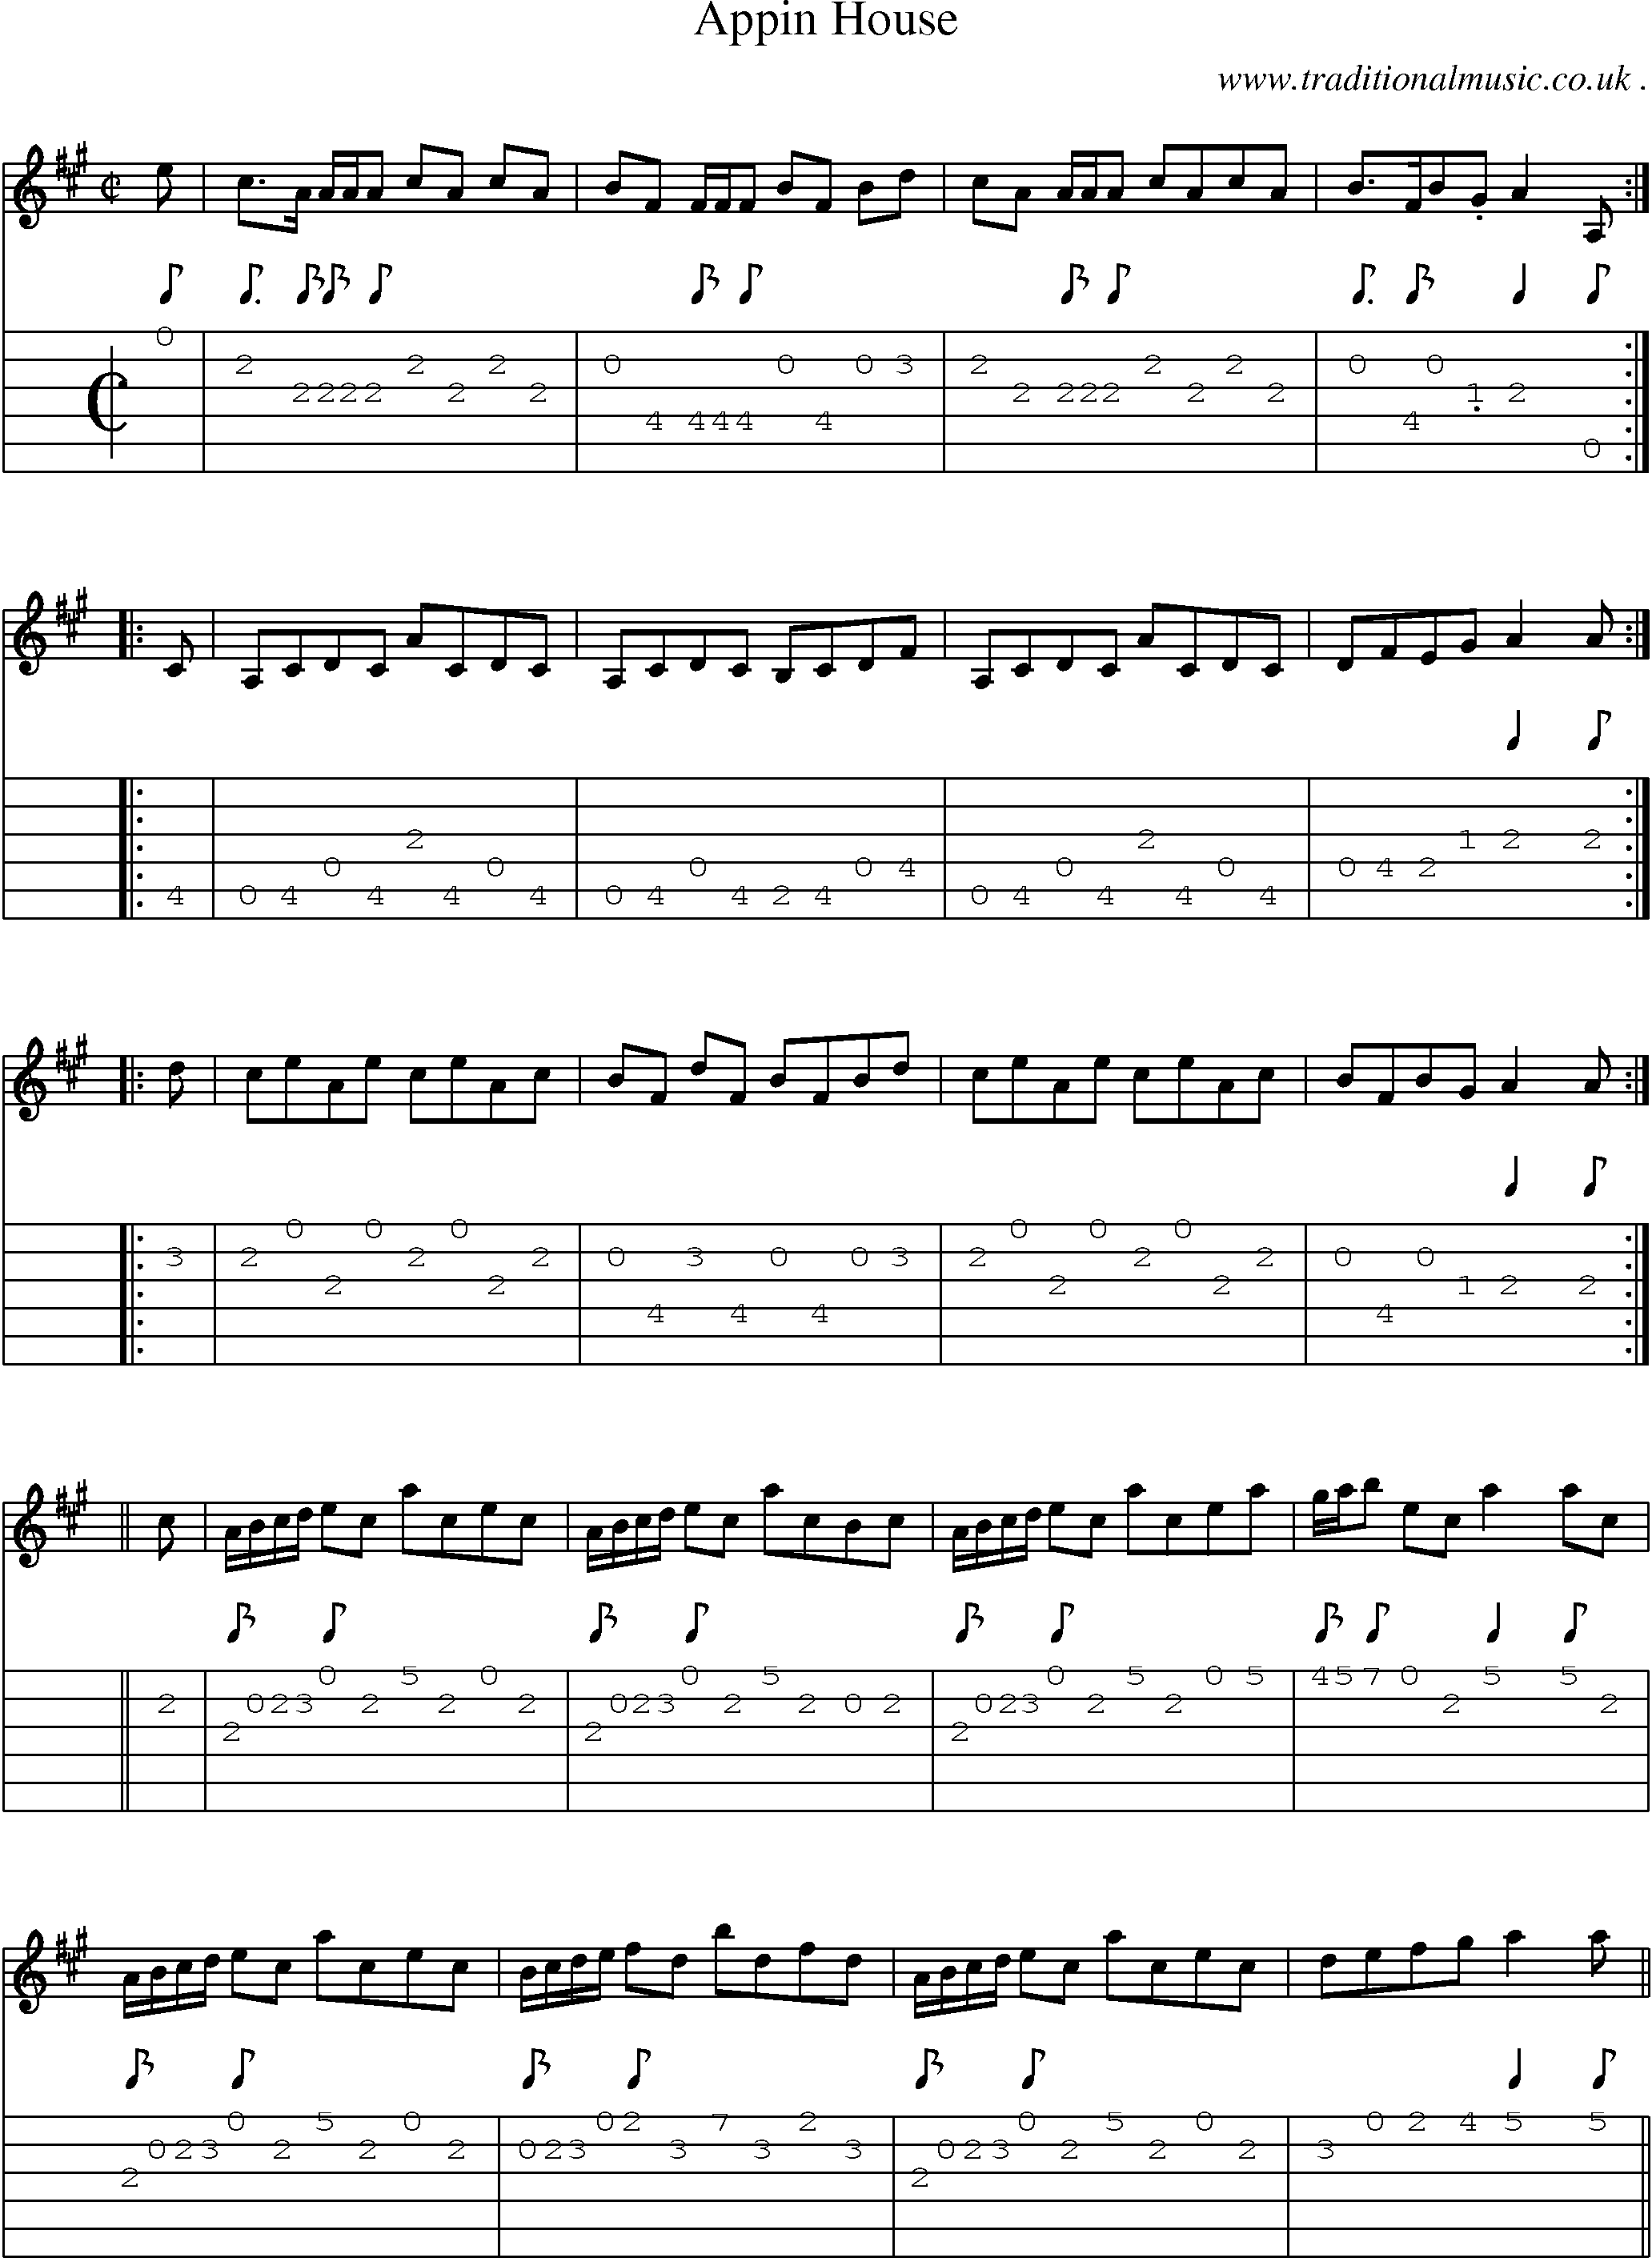 Sheet-music  score, Chords and Guitar Tabs for Appin House